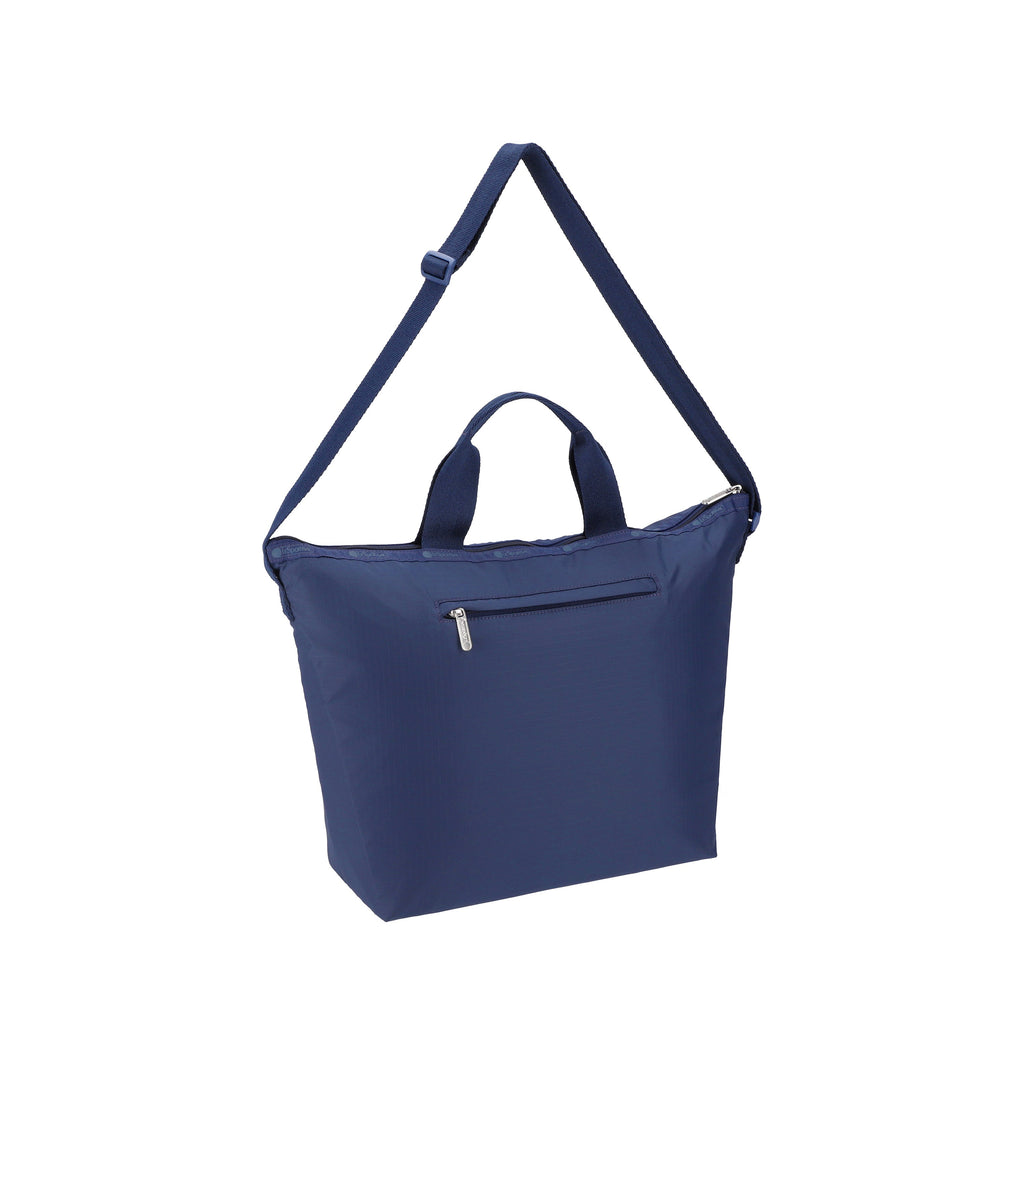 Deluxe Easy Carry Tote - 24403000557616